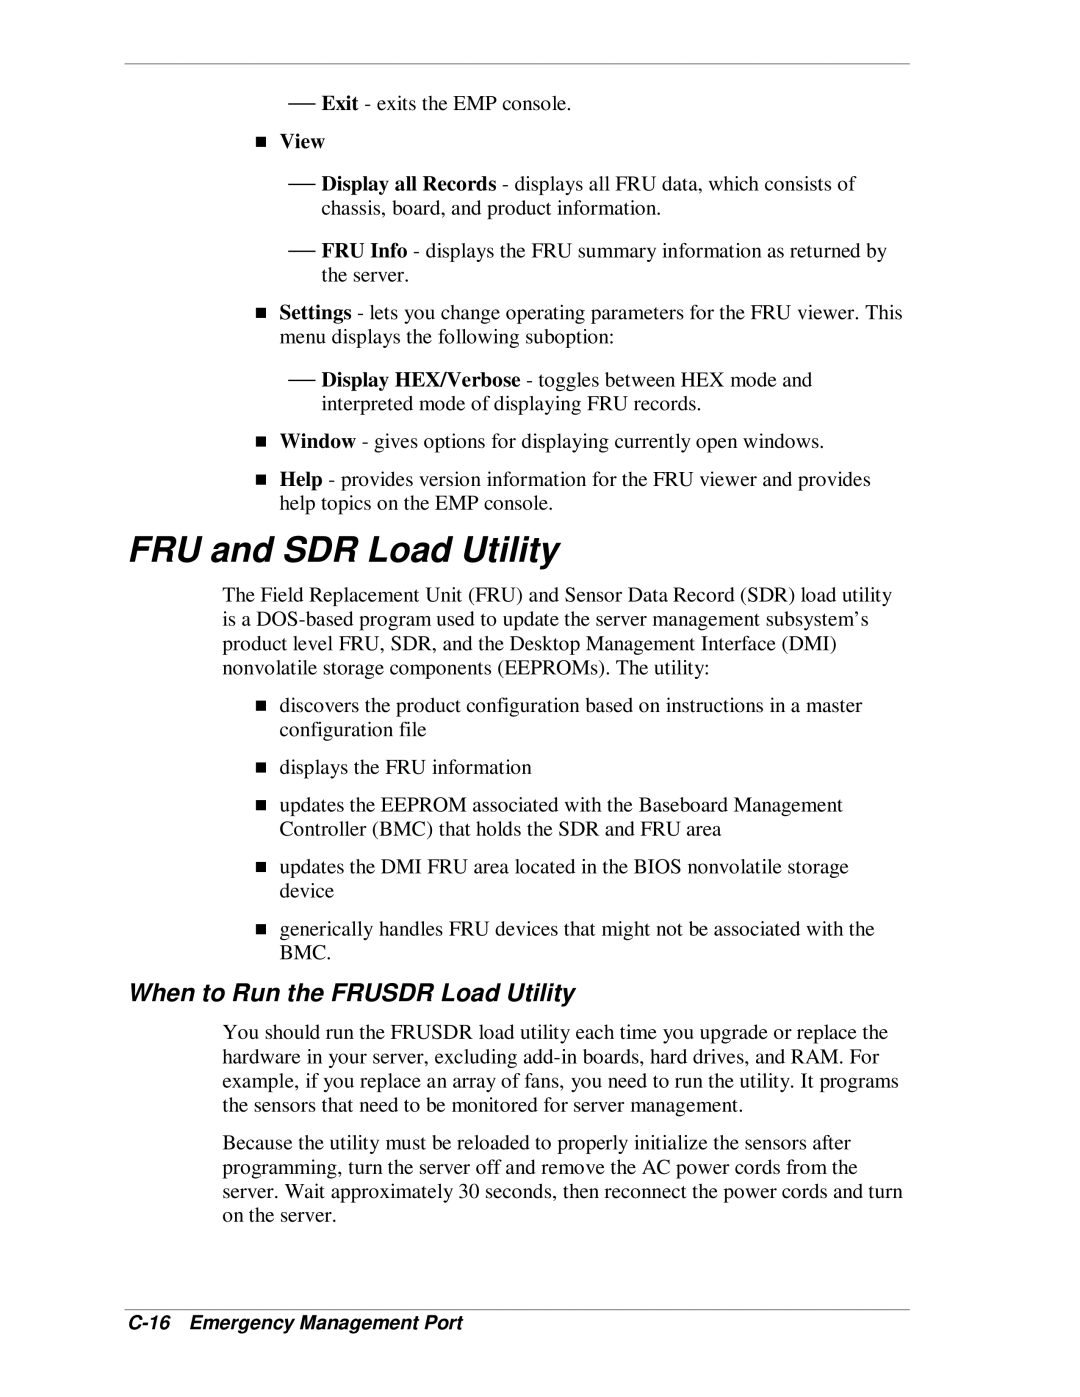 NEC MH4500 manual FRU and SDR Load Utility, When to Run the FRUSDR Load Utility, View 